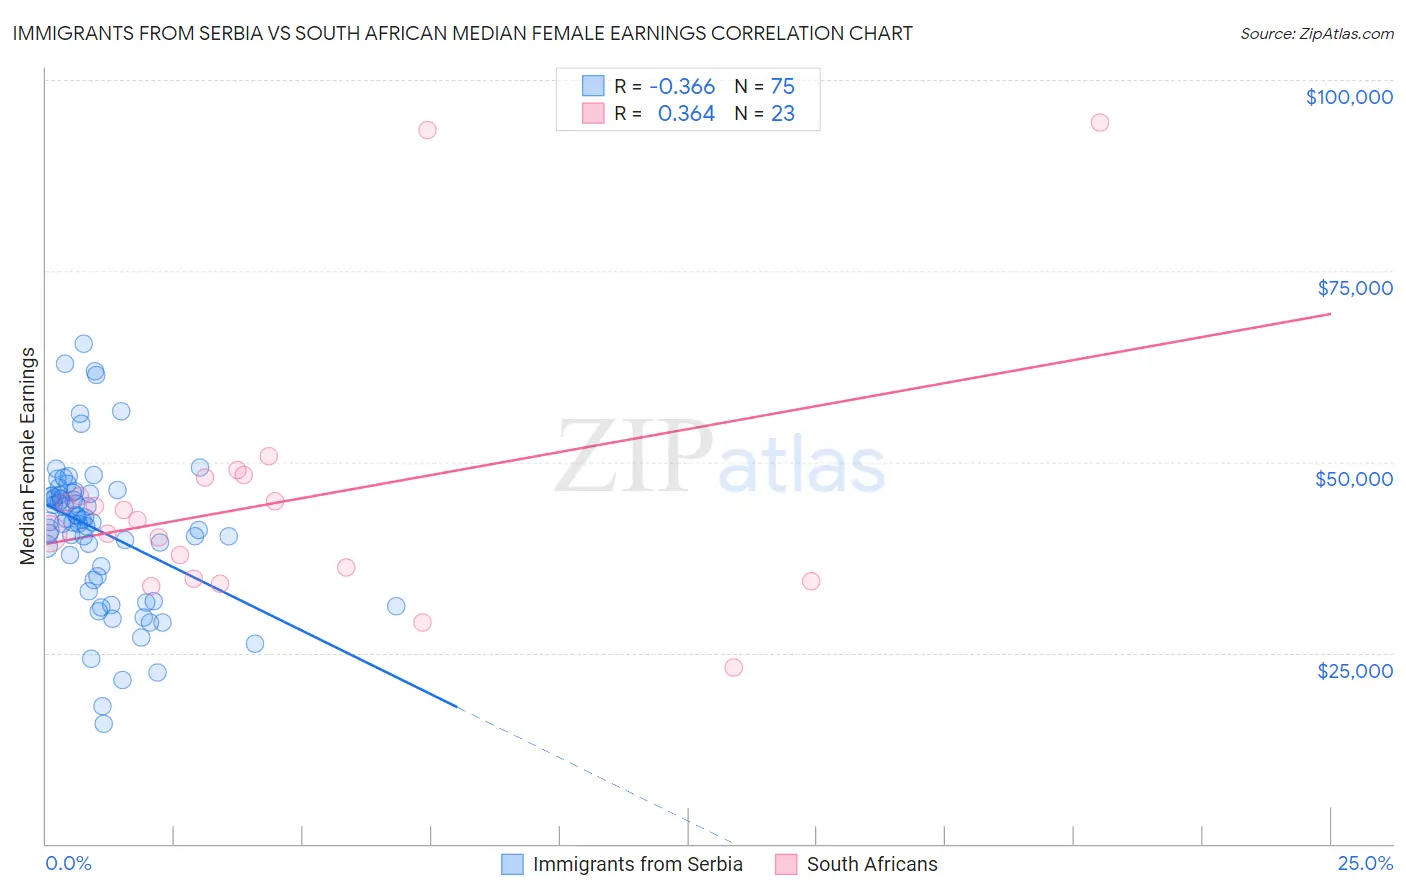 Immigrants from Serbia vs South African Median Female Earnings